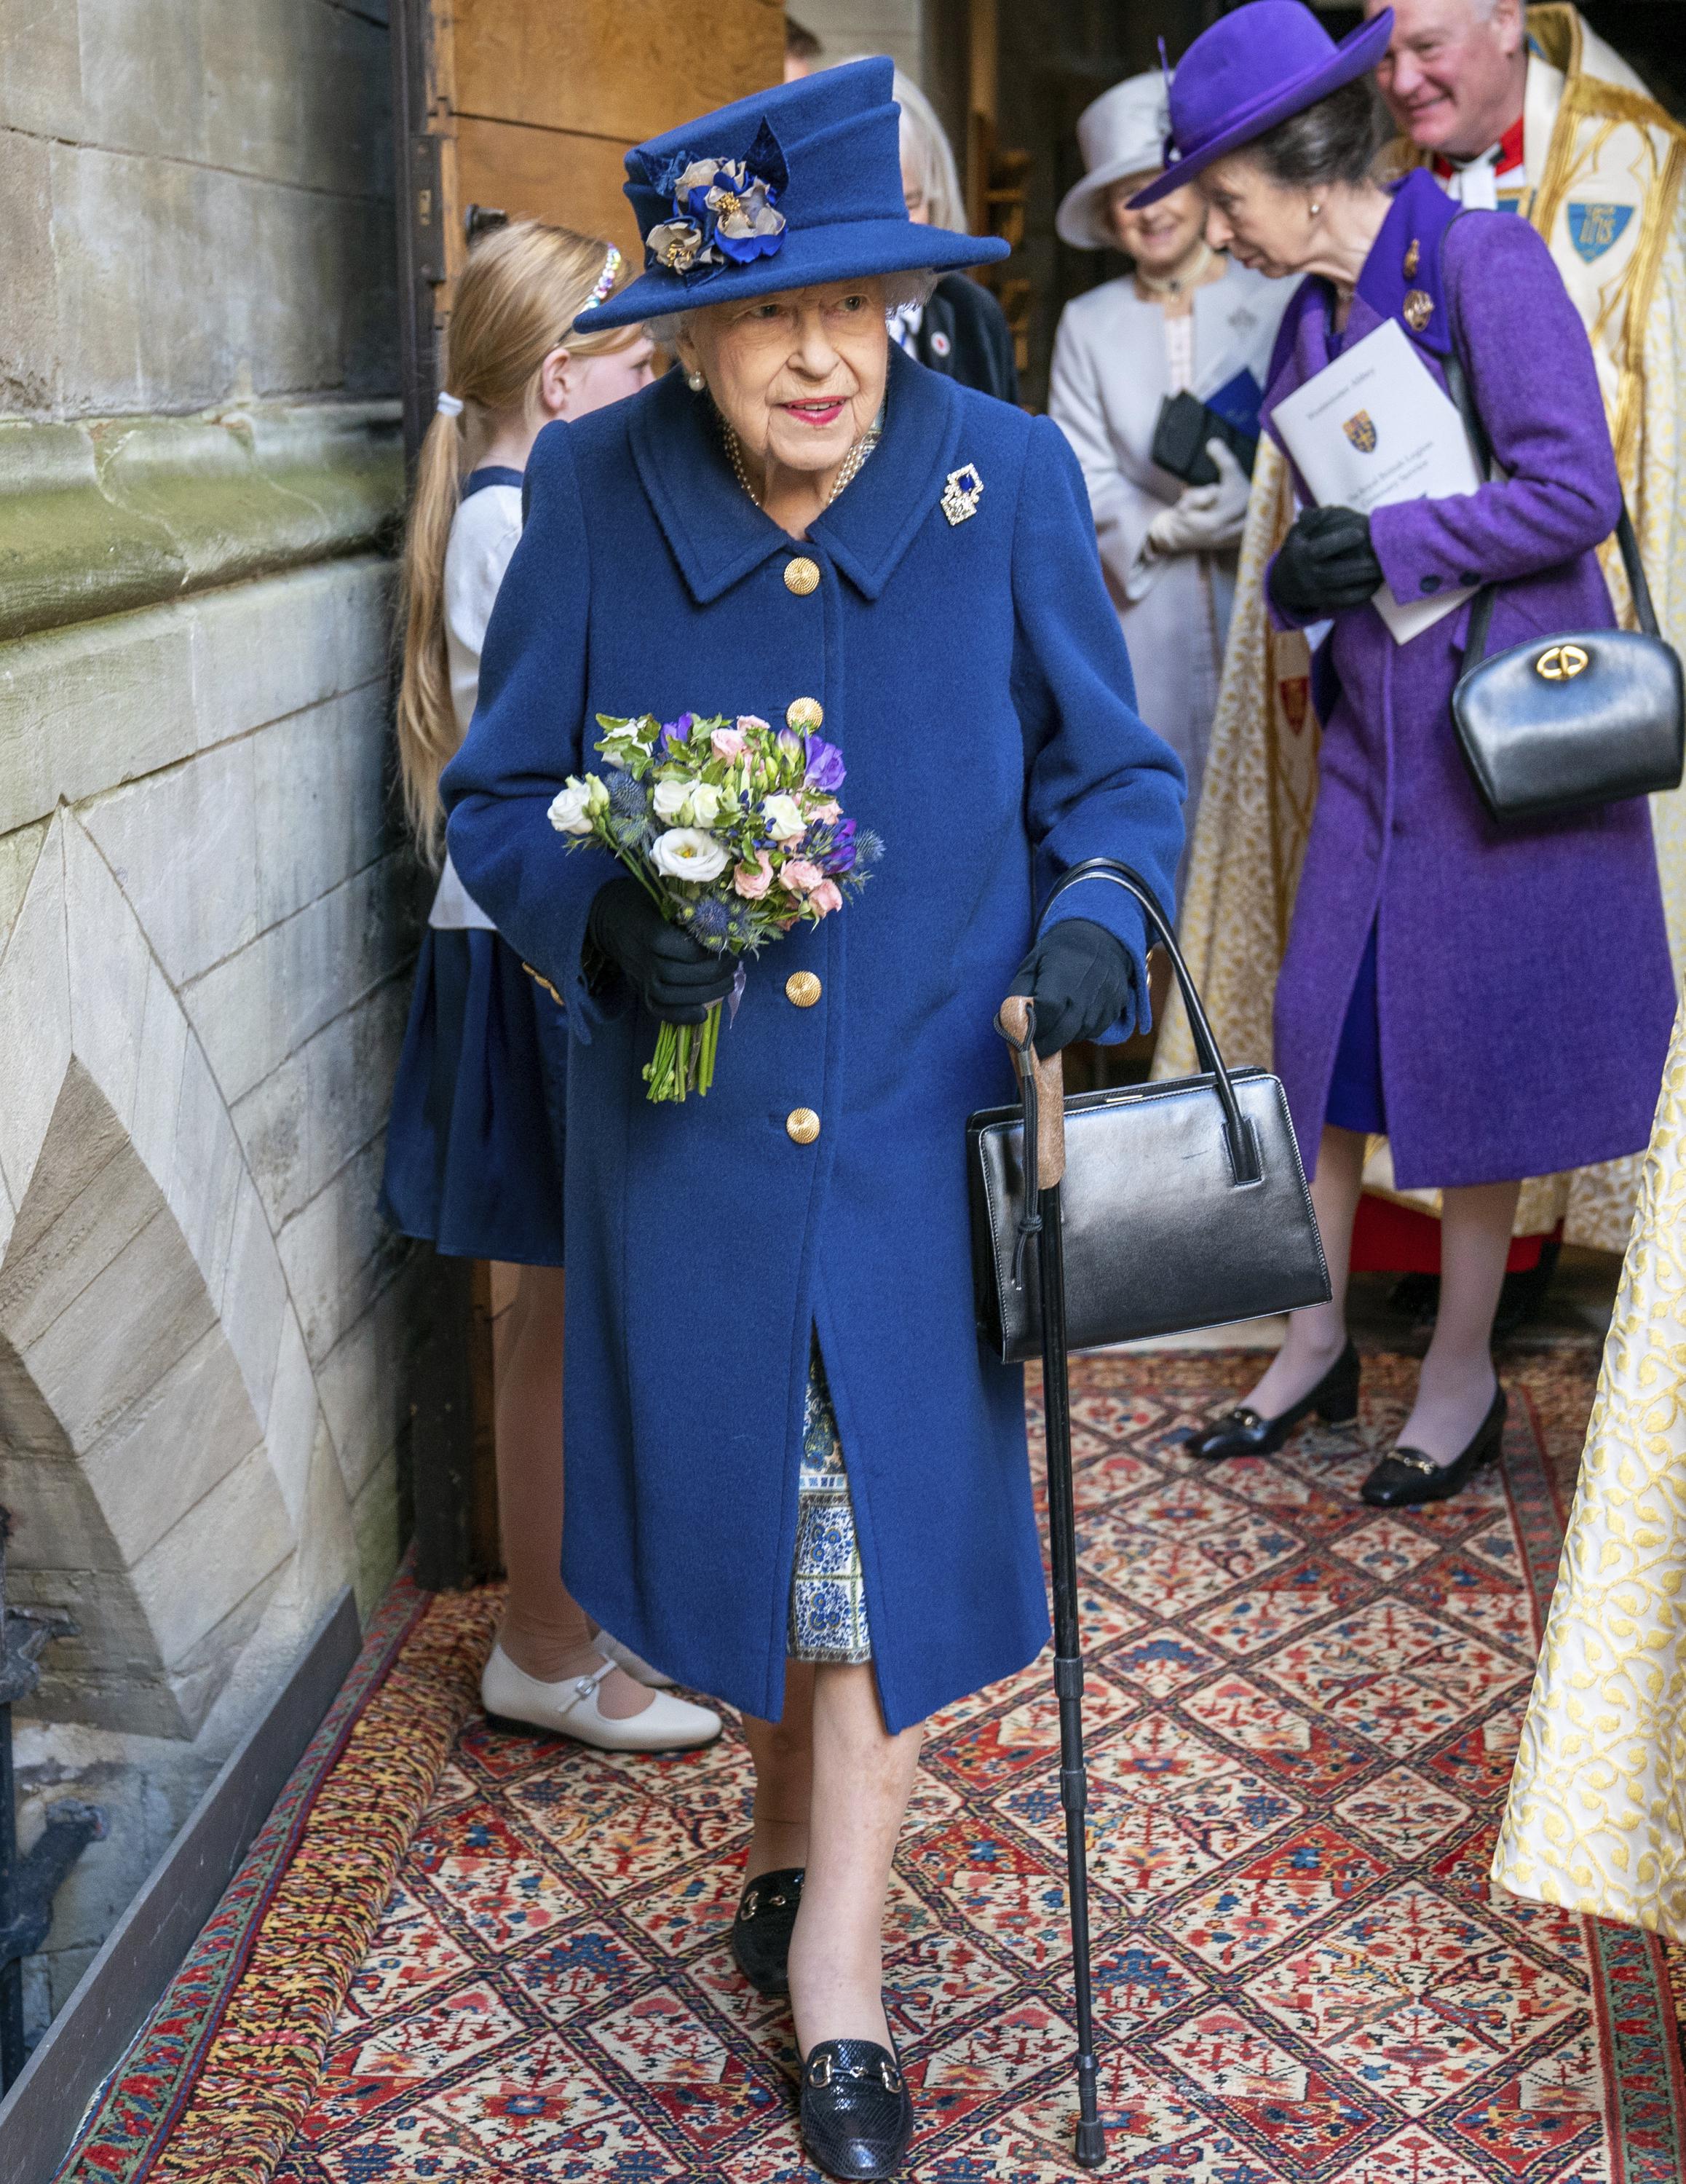 Queen Elizabeth II uses cane to walk into Westminster Abbey | AP News